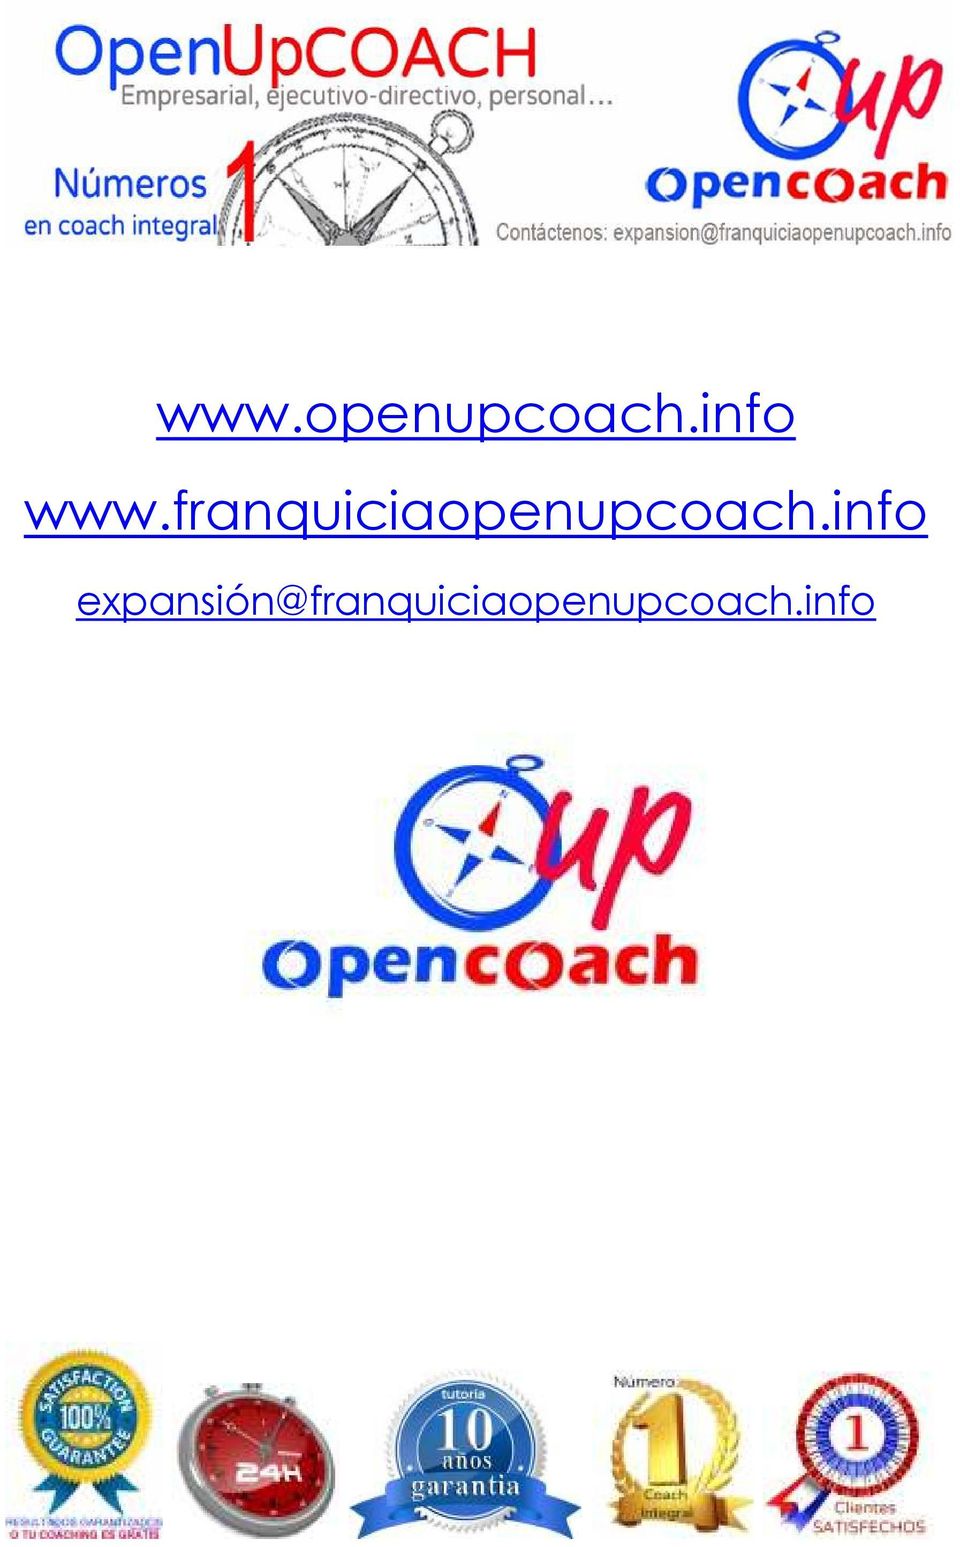 franquiciaopenupcoach.